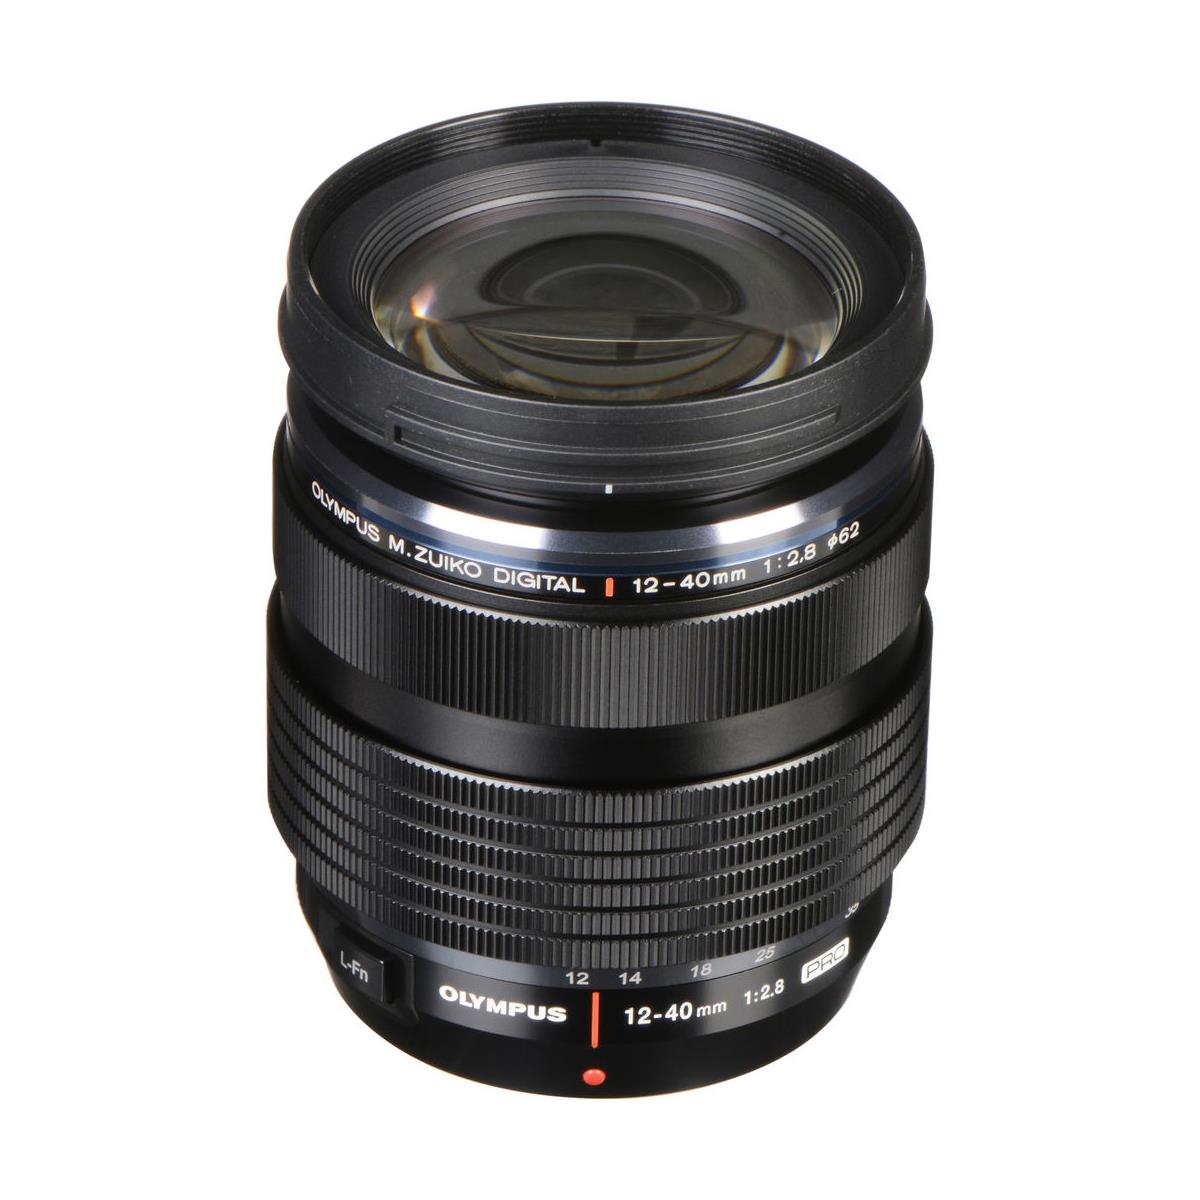 Image of Olympus M. Zuiko 12-40mm F/2.8 Zoom Lens for Micro 4/3 Mount